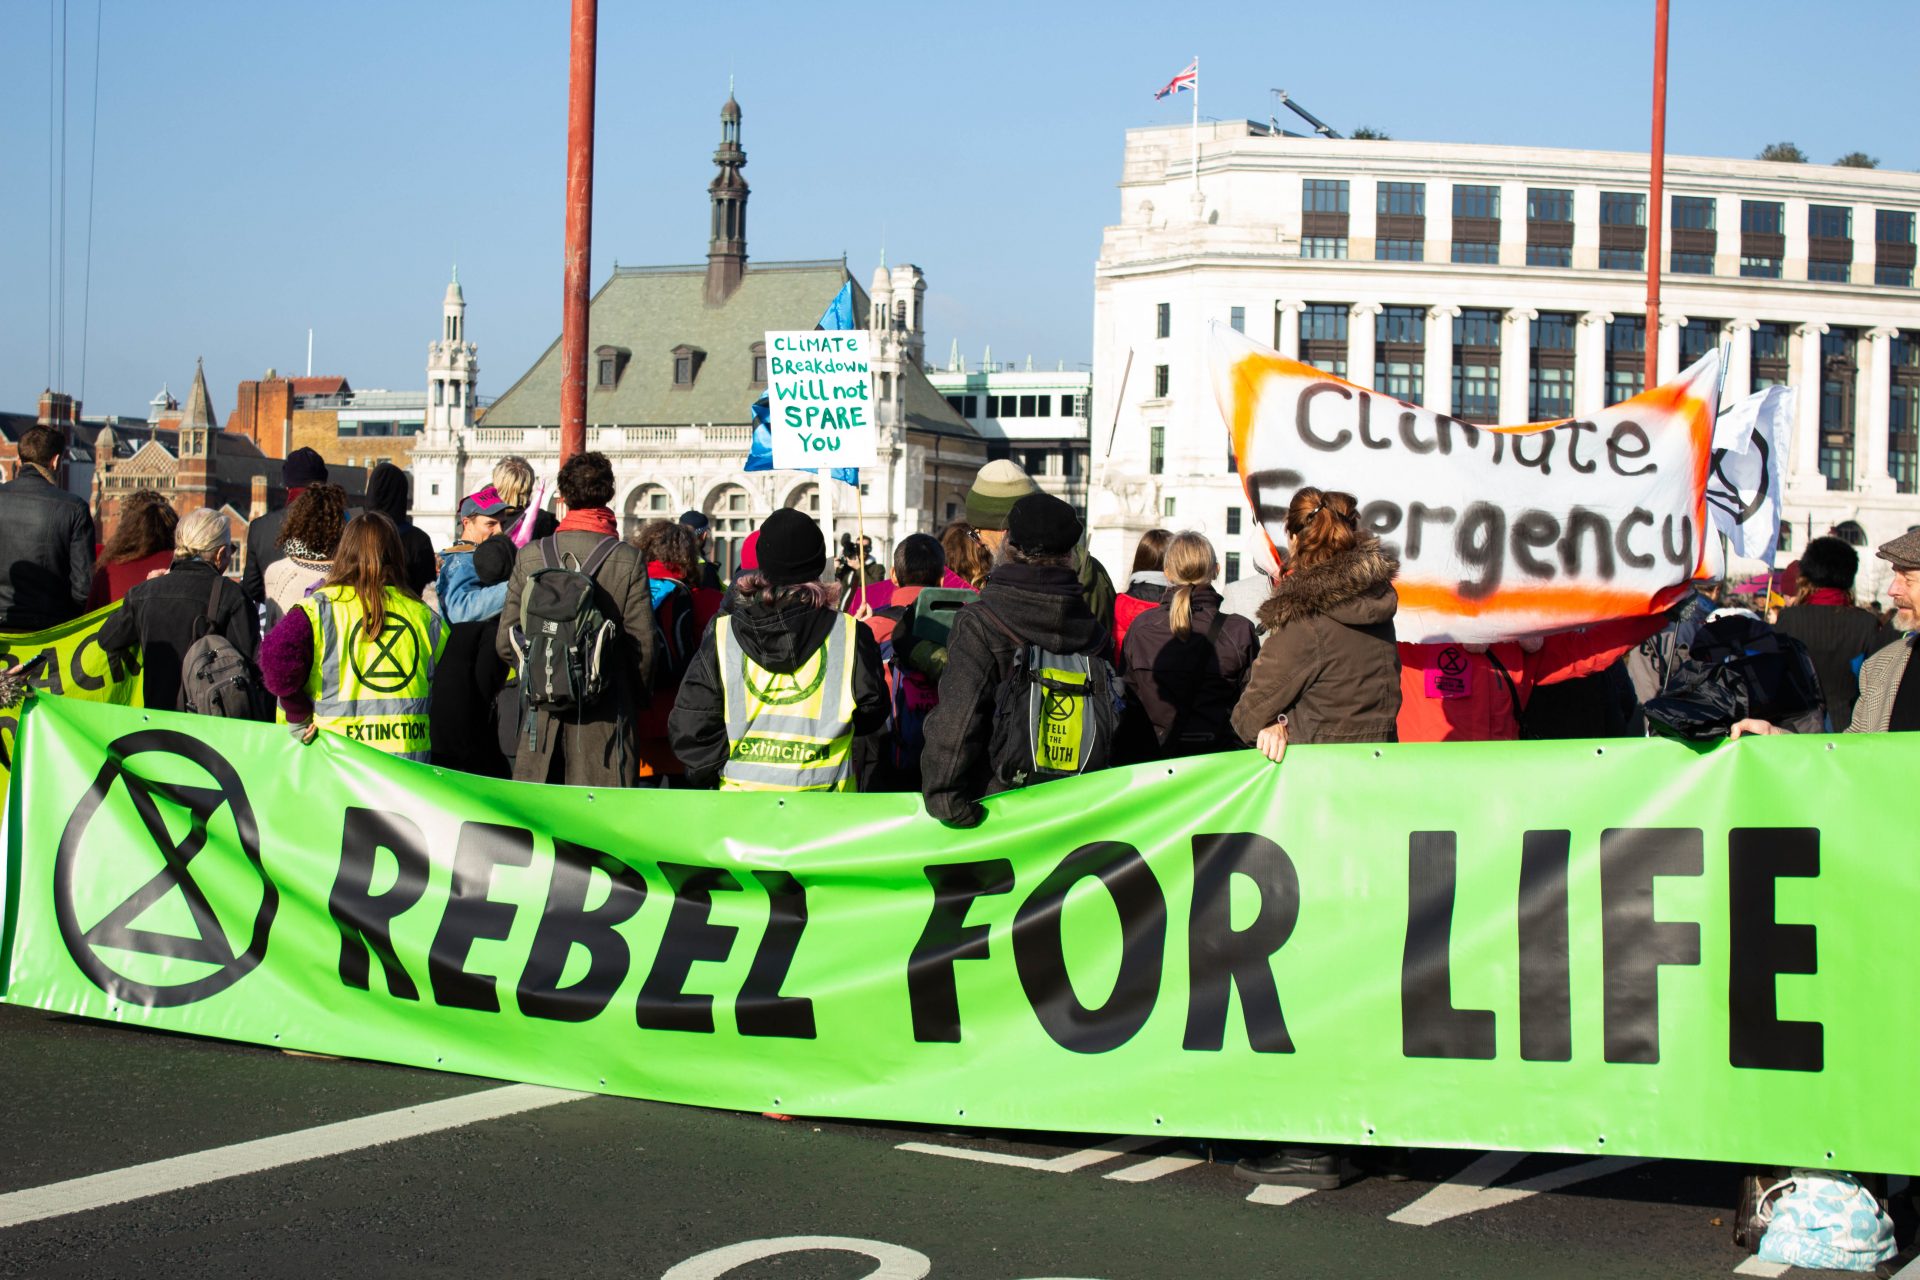 In late November 2018, Extinction Rebellion protestors in London blocked all of the city's major bridges with the aim of causing ' gridlock across the capital, highlighting the impending economic and environmental breakdown' (Credit: Julia Hawkins)